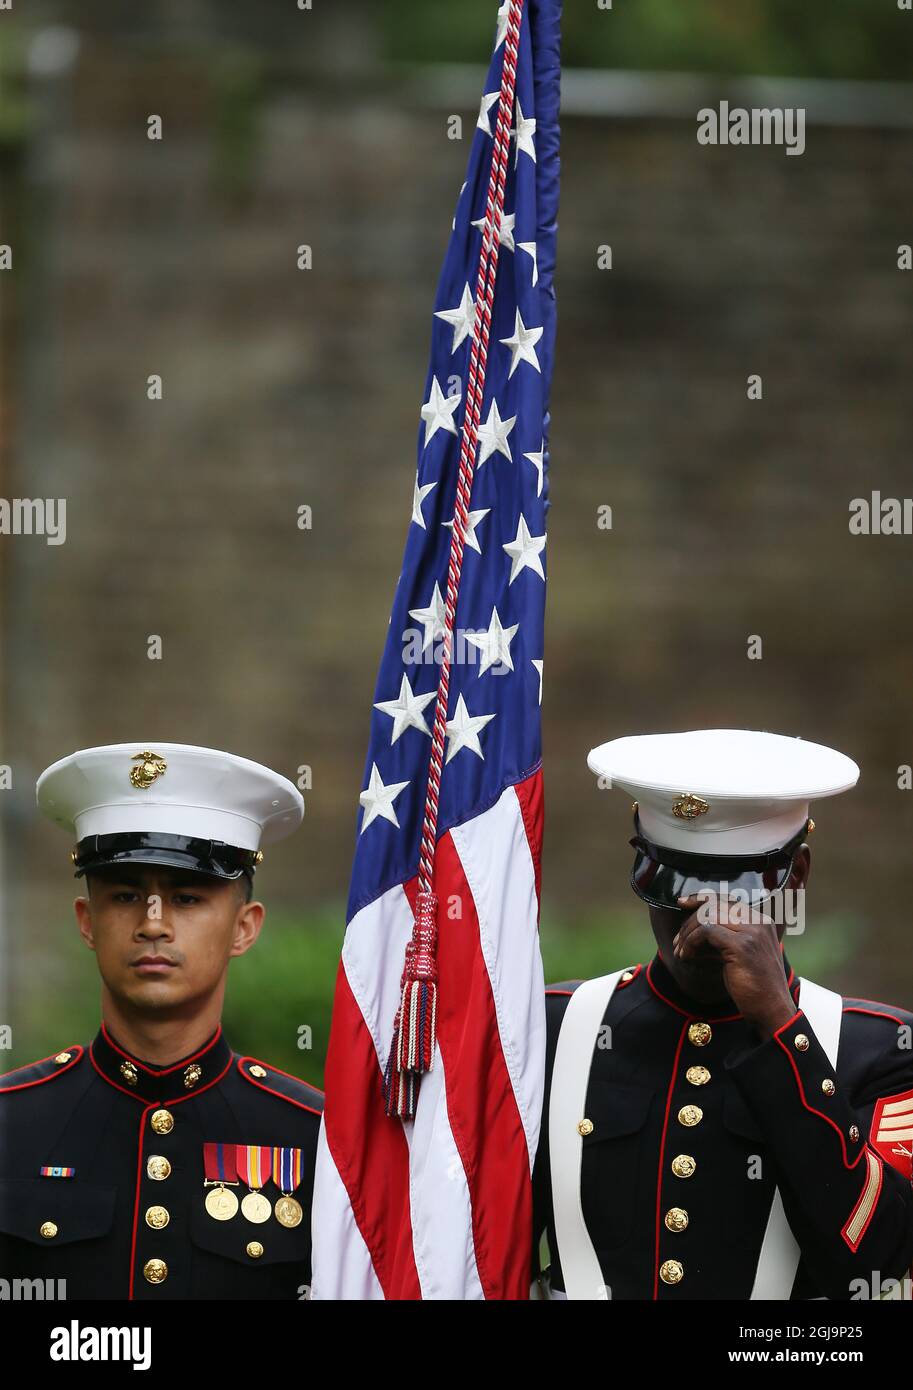 US Marines Sgt Jhudiel Rabara (left) and Sgt Wagner Paul Jr., during a 20th anniversary event at the US Ambassador's Residence in Dublin to commemorate the lives lost during the 9/11 attacks. Picture date: Wednesday August 25, 2021. Stock Photo